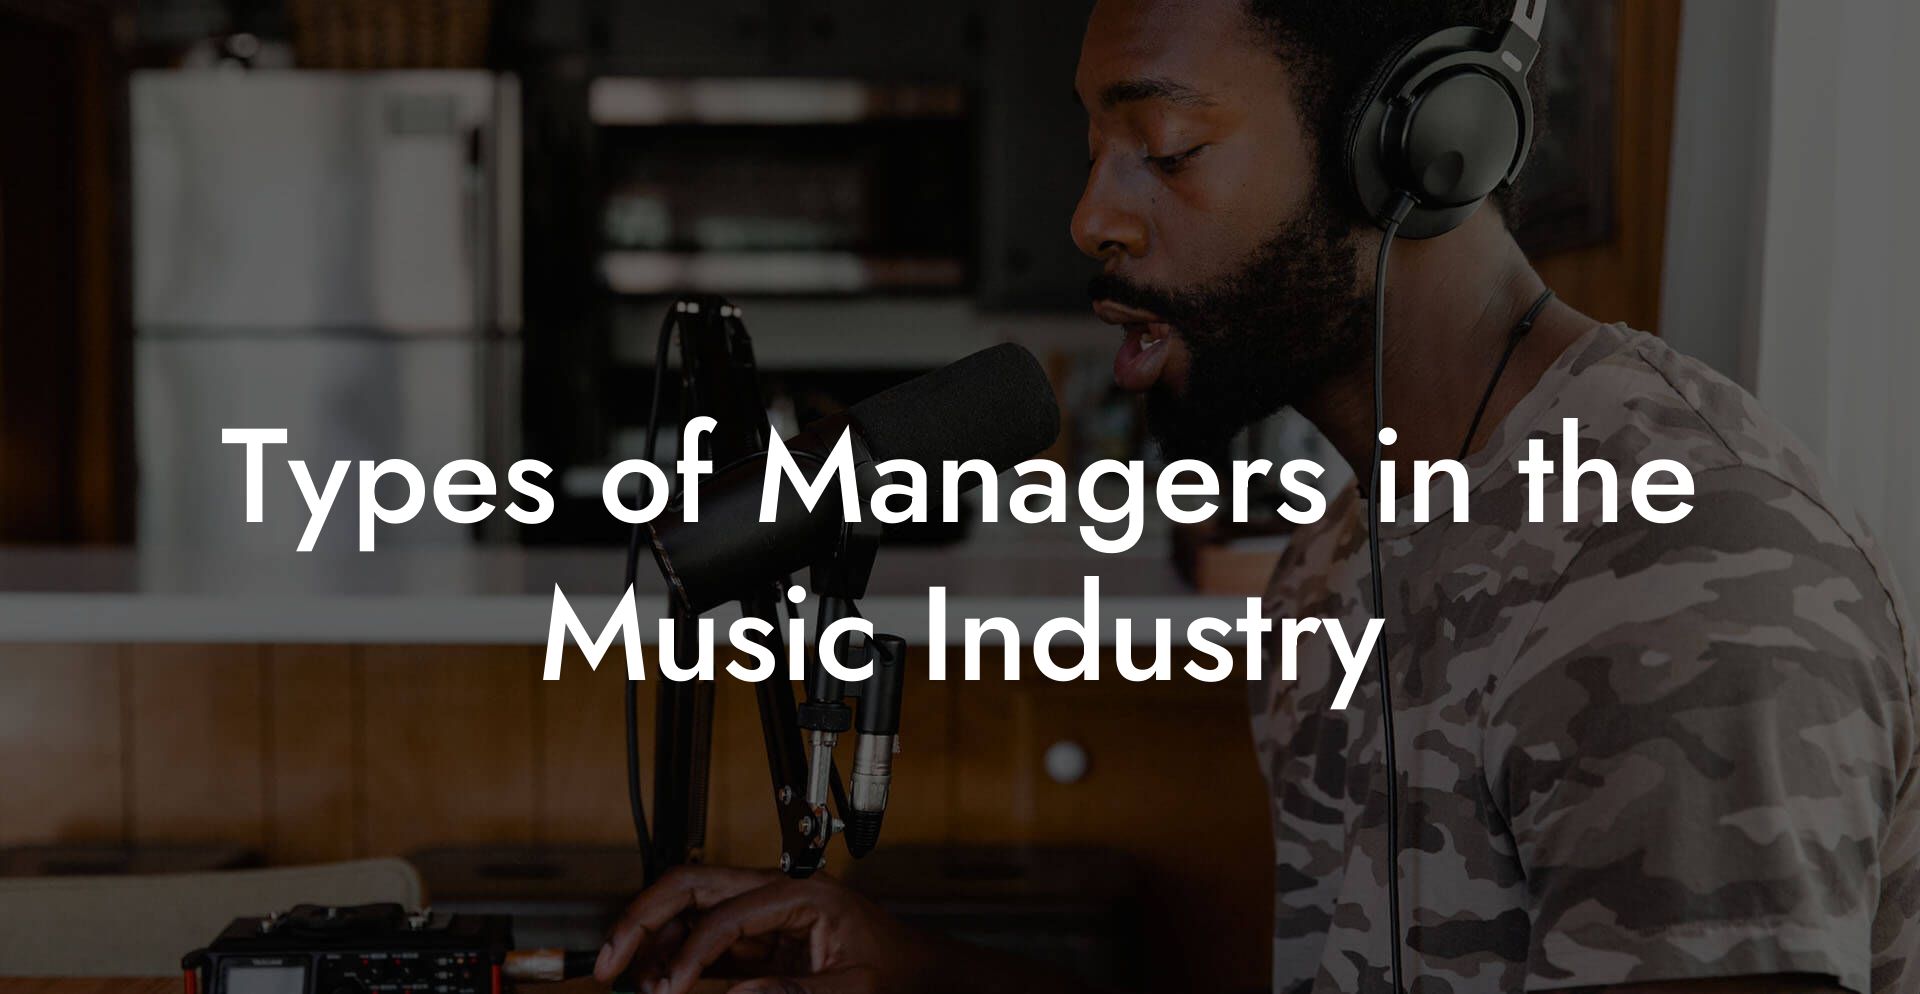 Types of Managers in the Music Industry